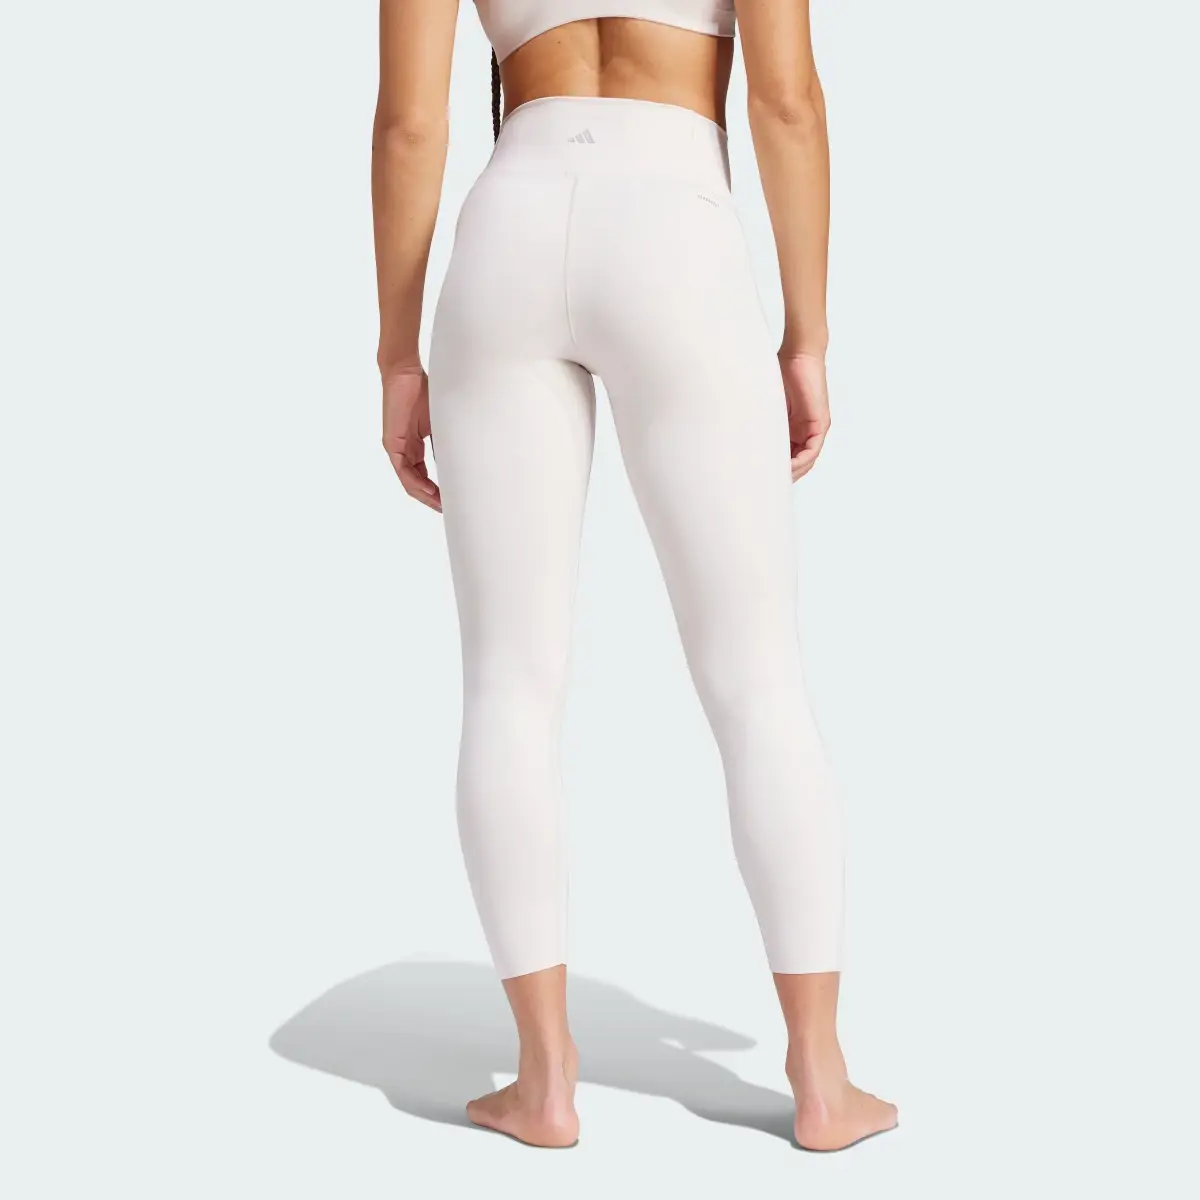 Adidas All Me Luxe 7/8 Leggings. 2